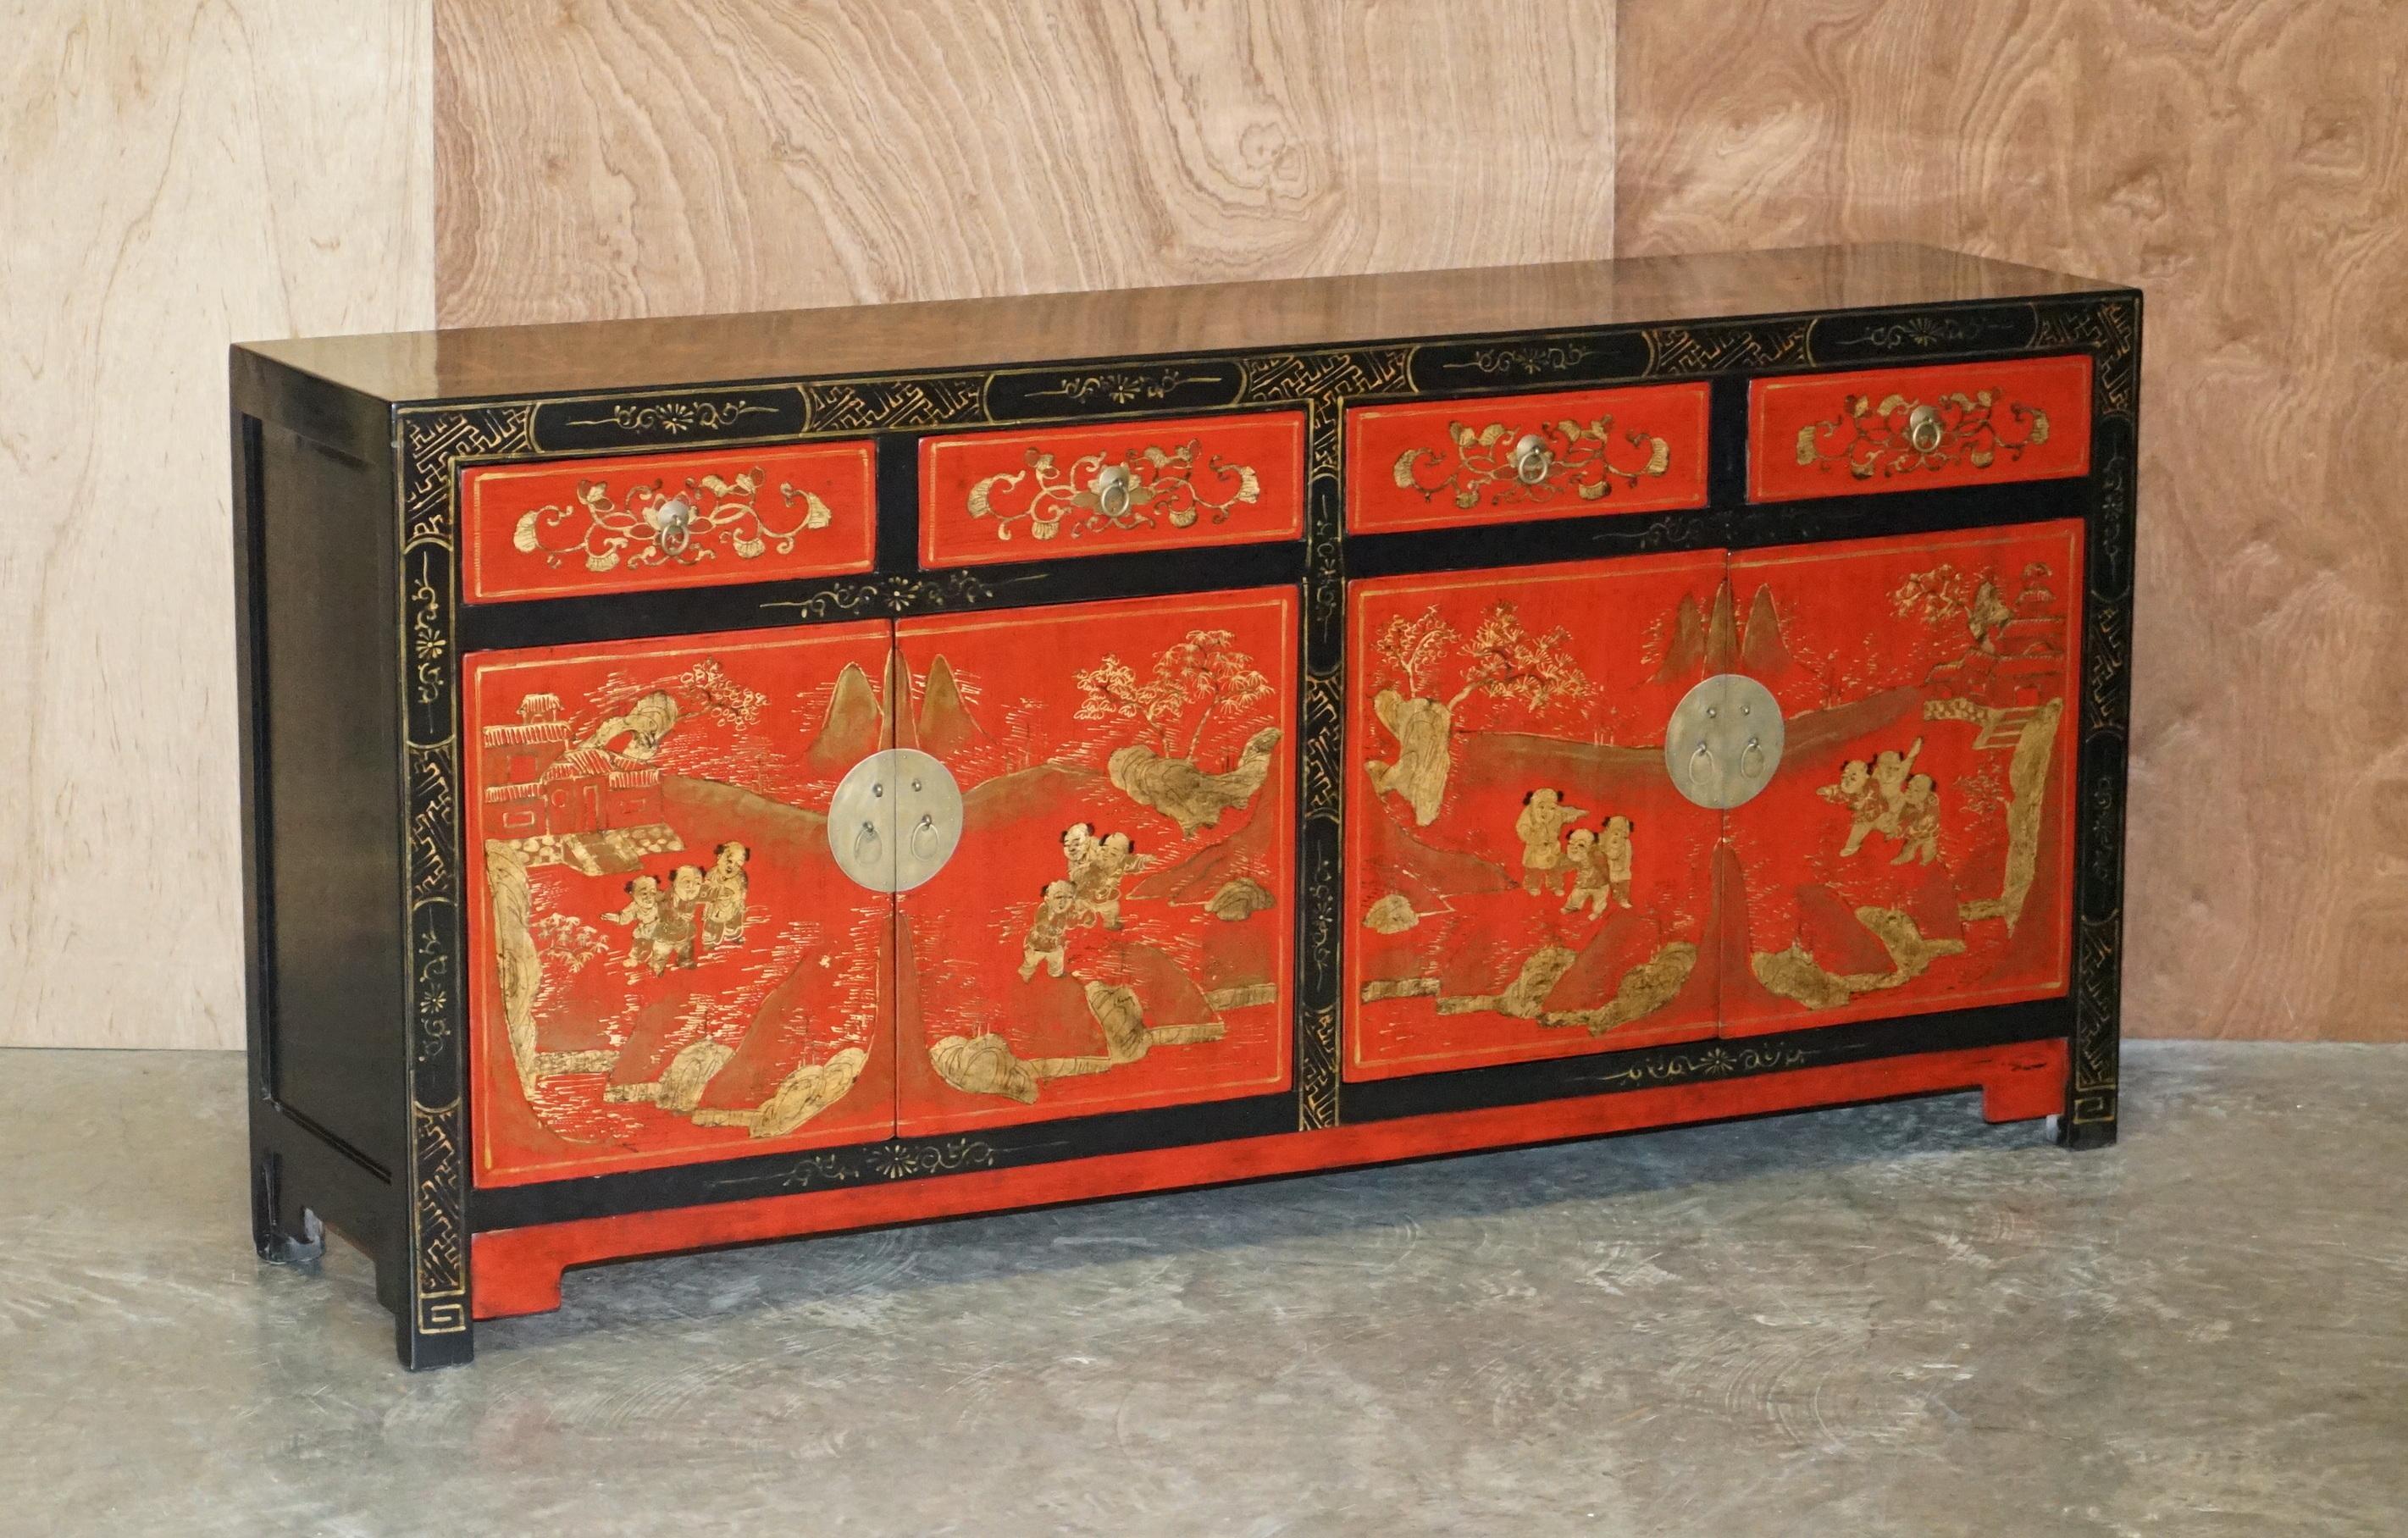 We are delighted to offer for sale this lovely vintage beautifully decorated hand painted and lacquered Oriental sideboard with drawers

A very good looking and well made piece, it is larger with much brighter colours than the norm, it really is a